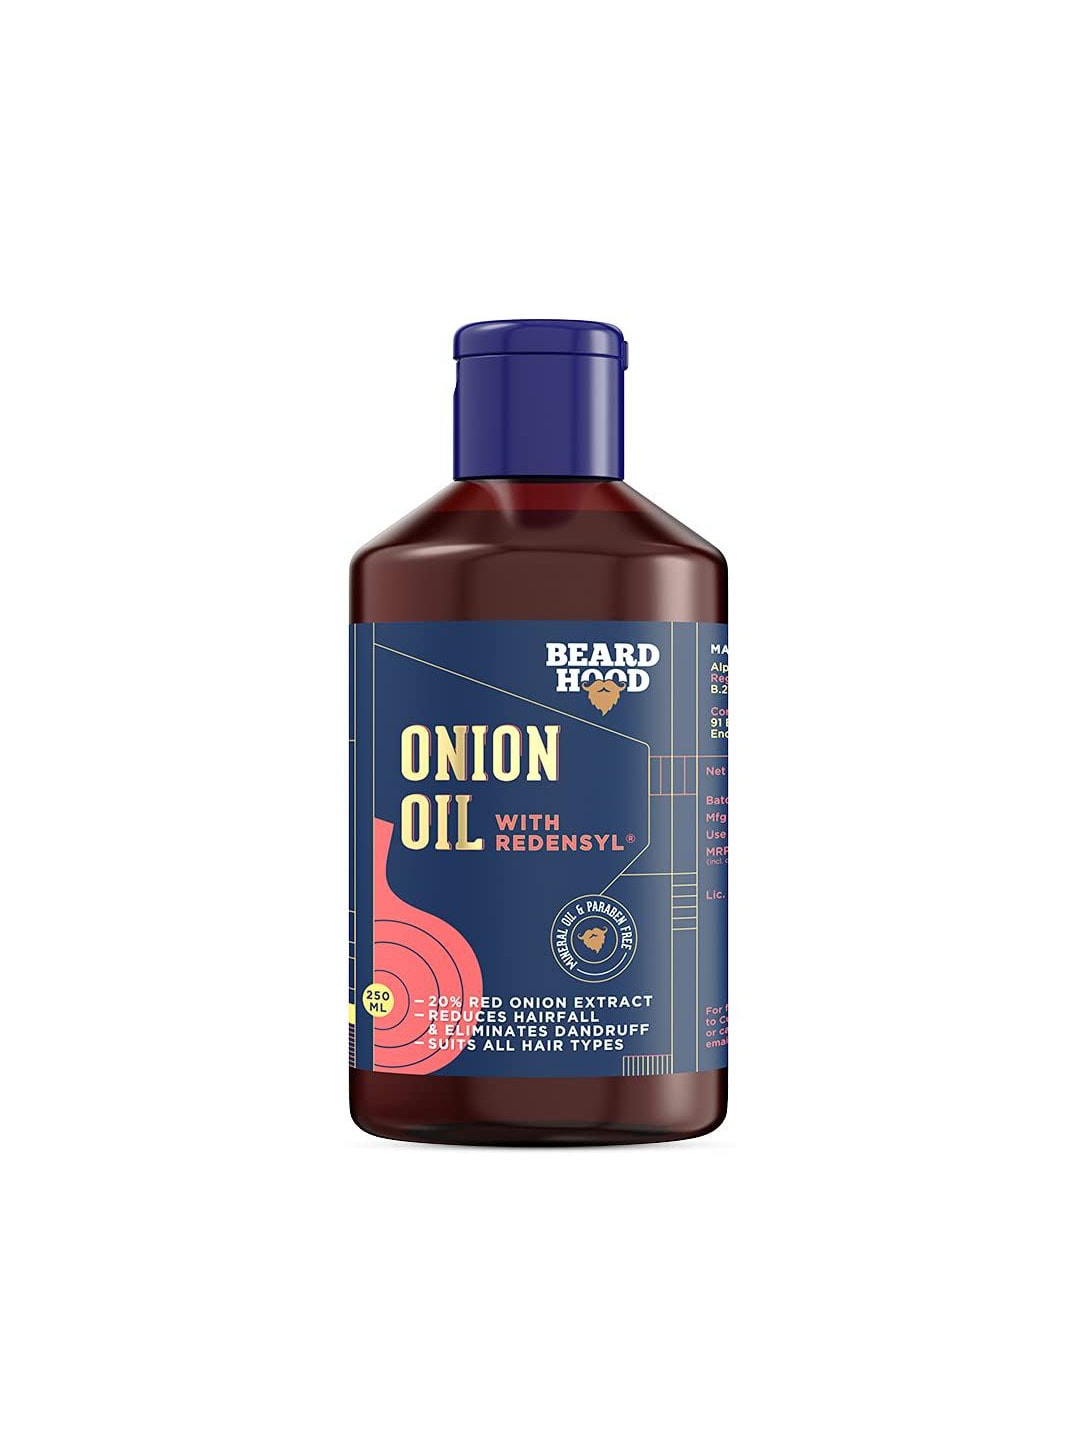 Beardhood Onion Oil with Redensyl for Hair Growth & Anti-Hairfall 250 ml Price in India